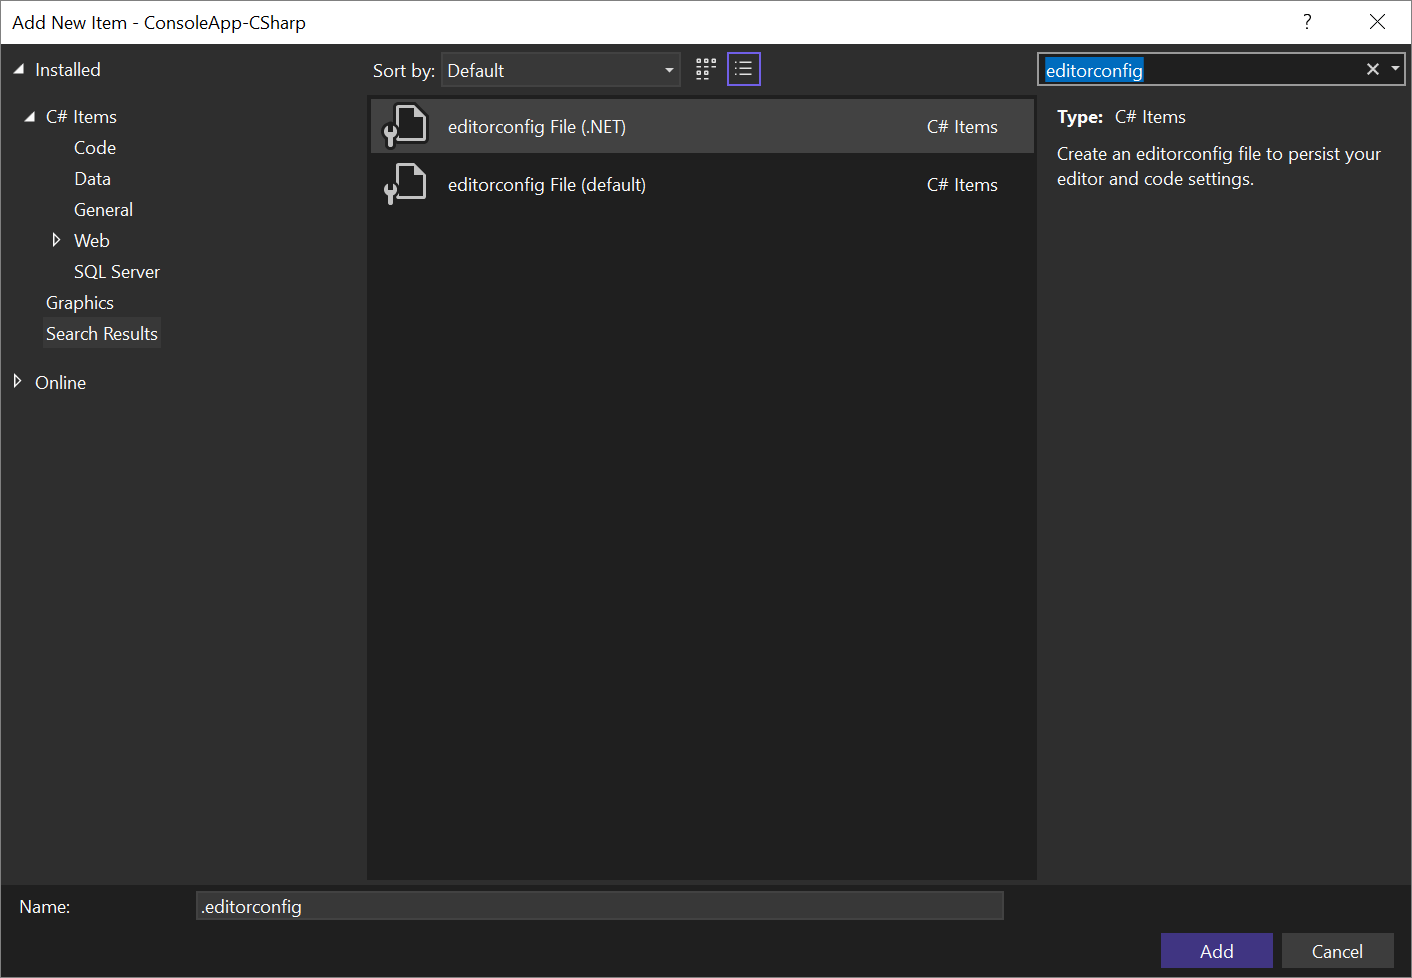 Screenshot of the EditorConfig file templates for C# in Visual Studio.